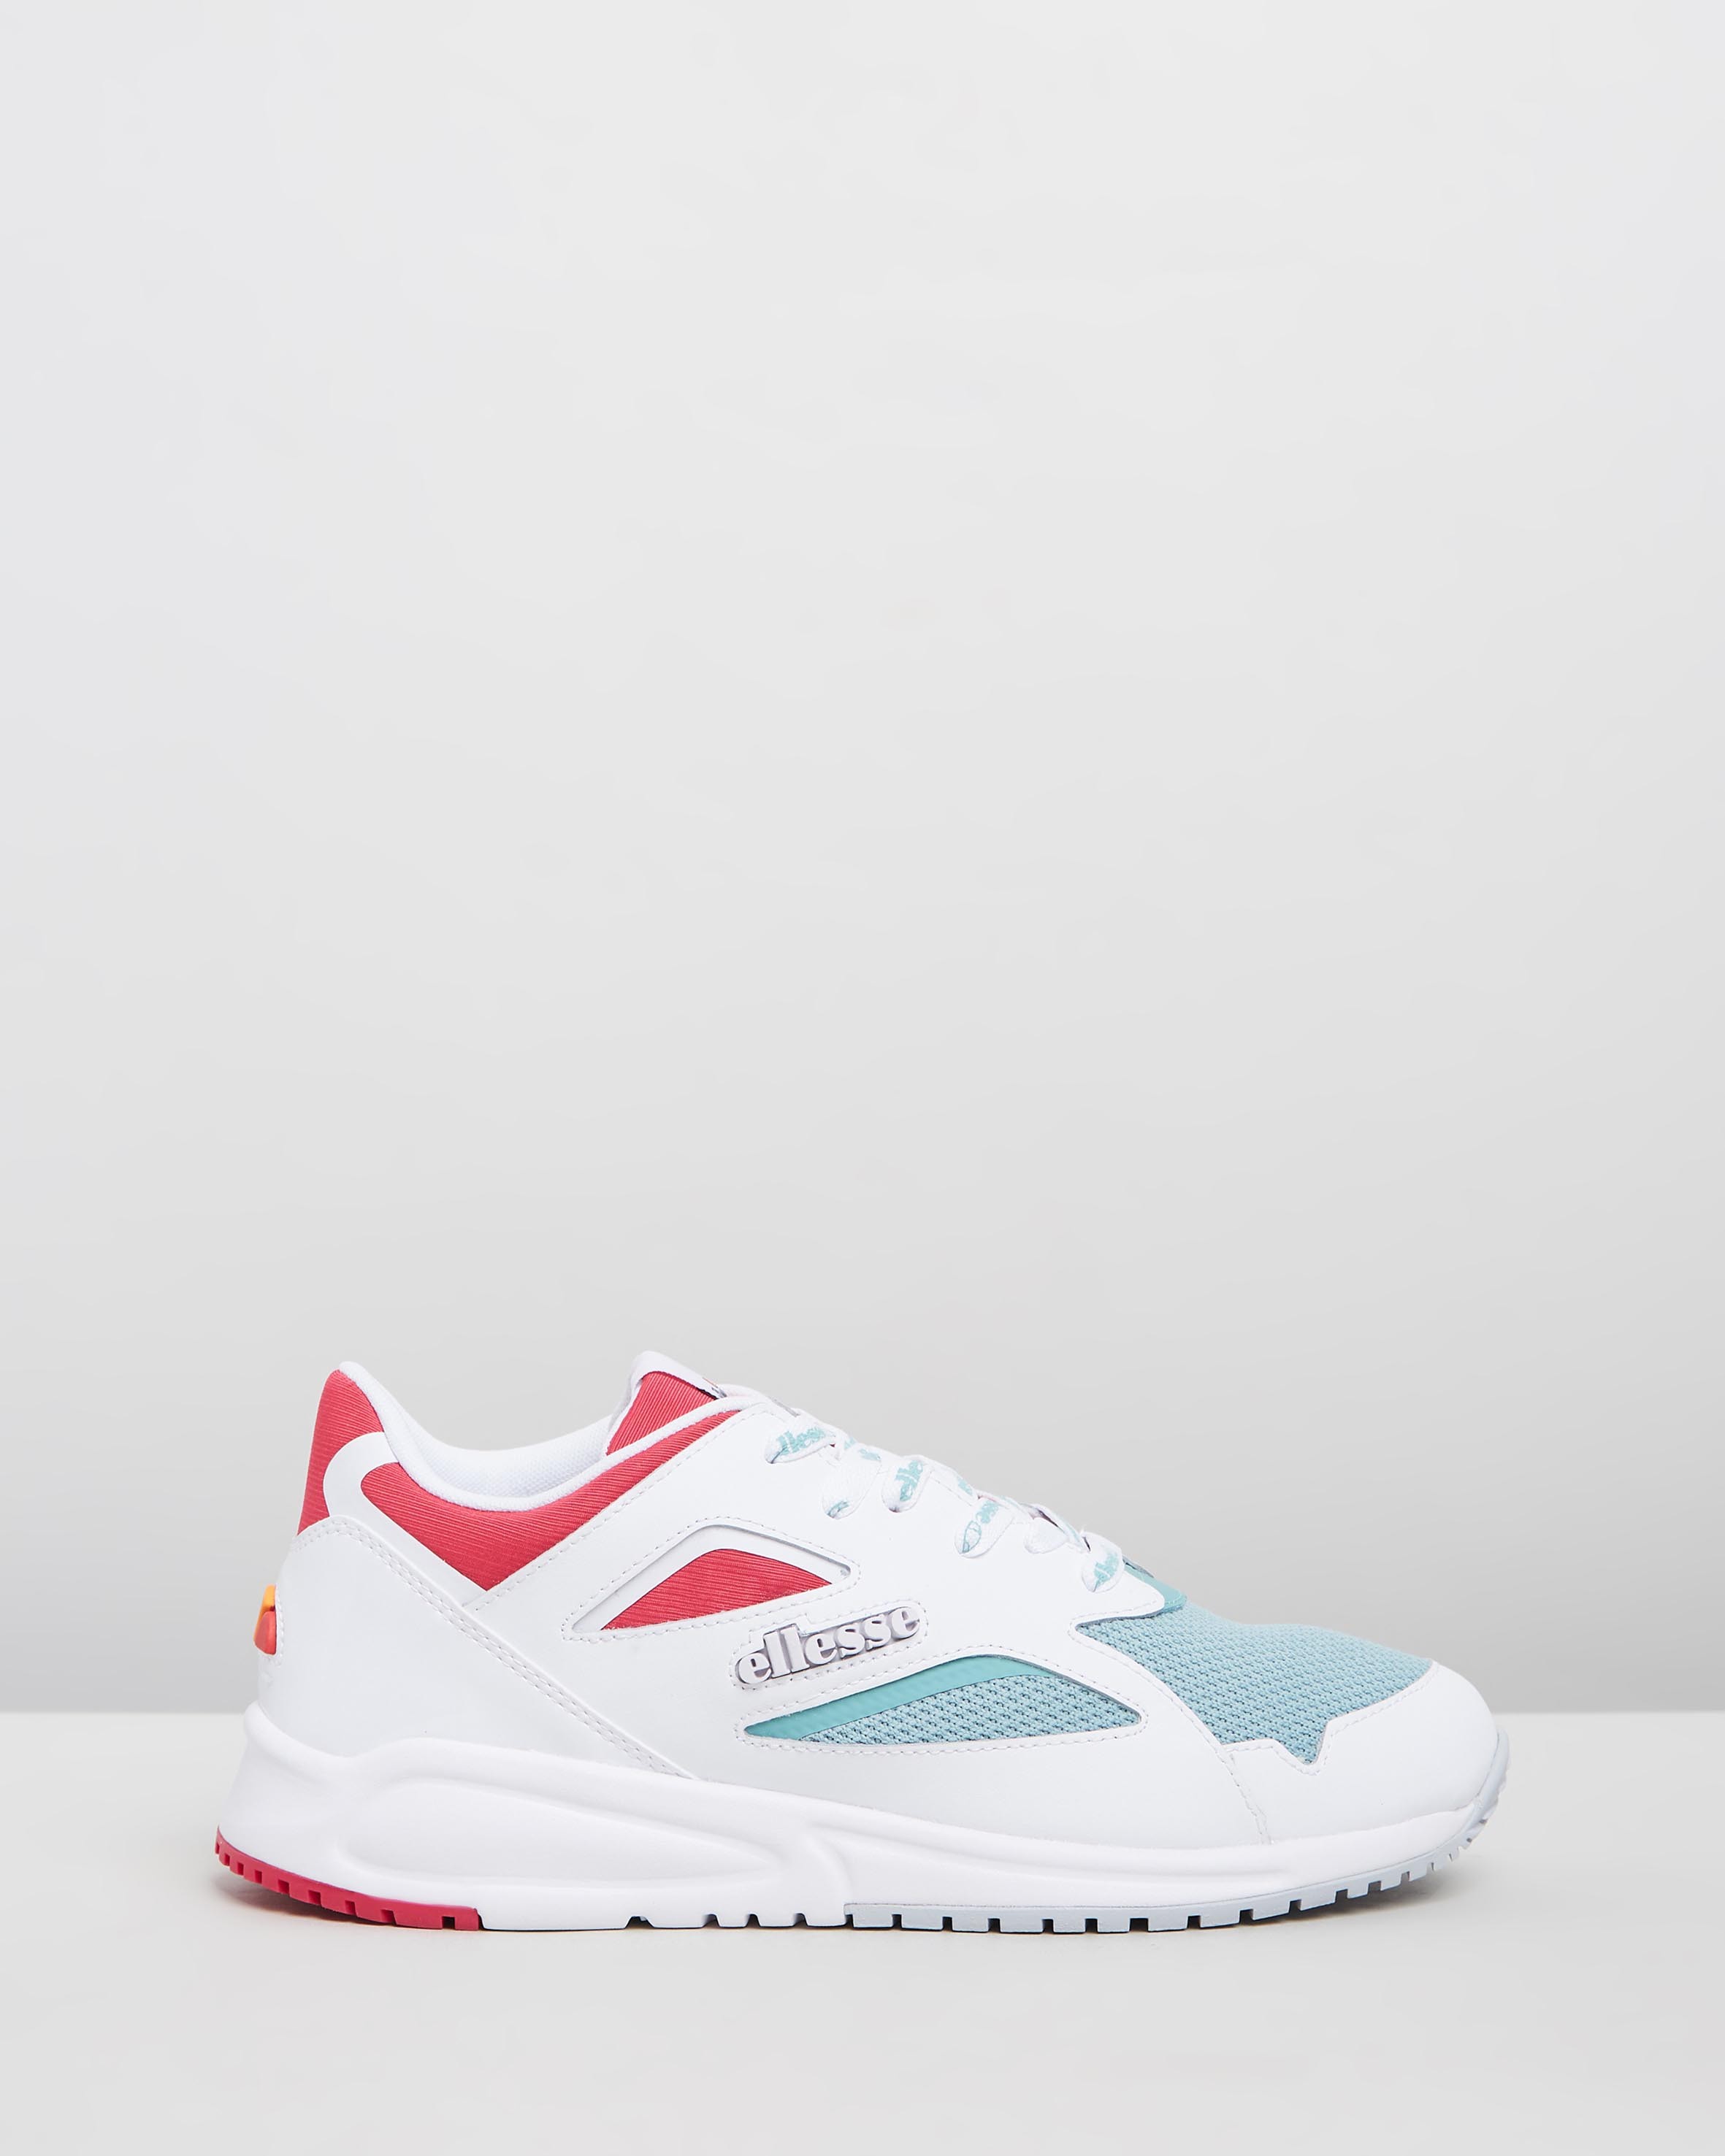 Maladroit Ladder bagageruimte Contest - Women's White, Turquoise & Pink by Ellesse | ShoeSales